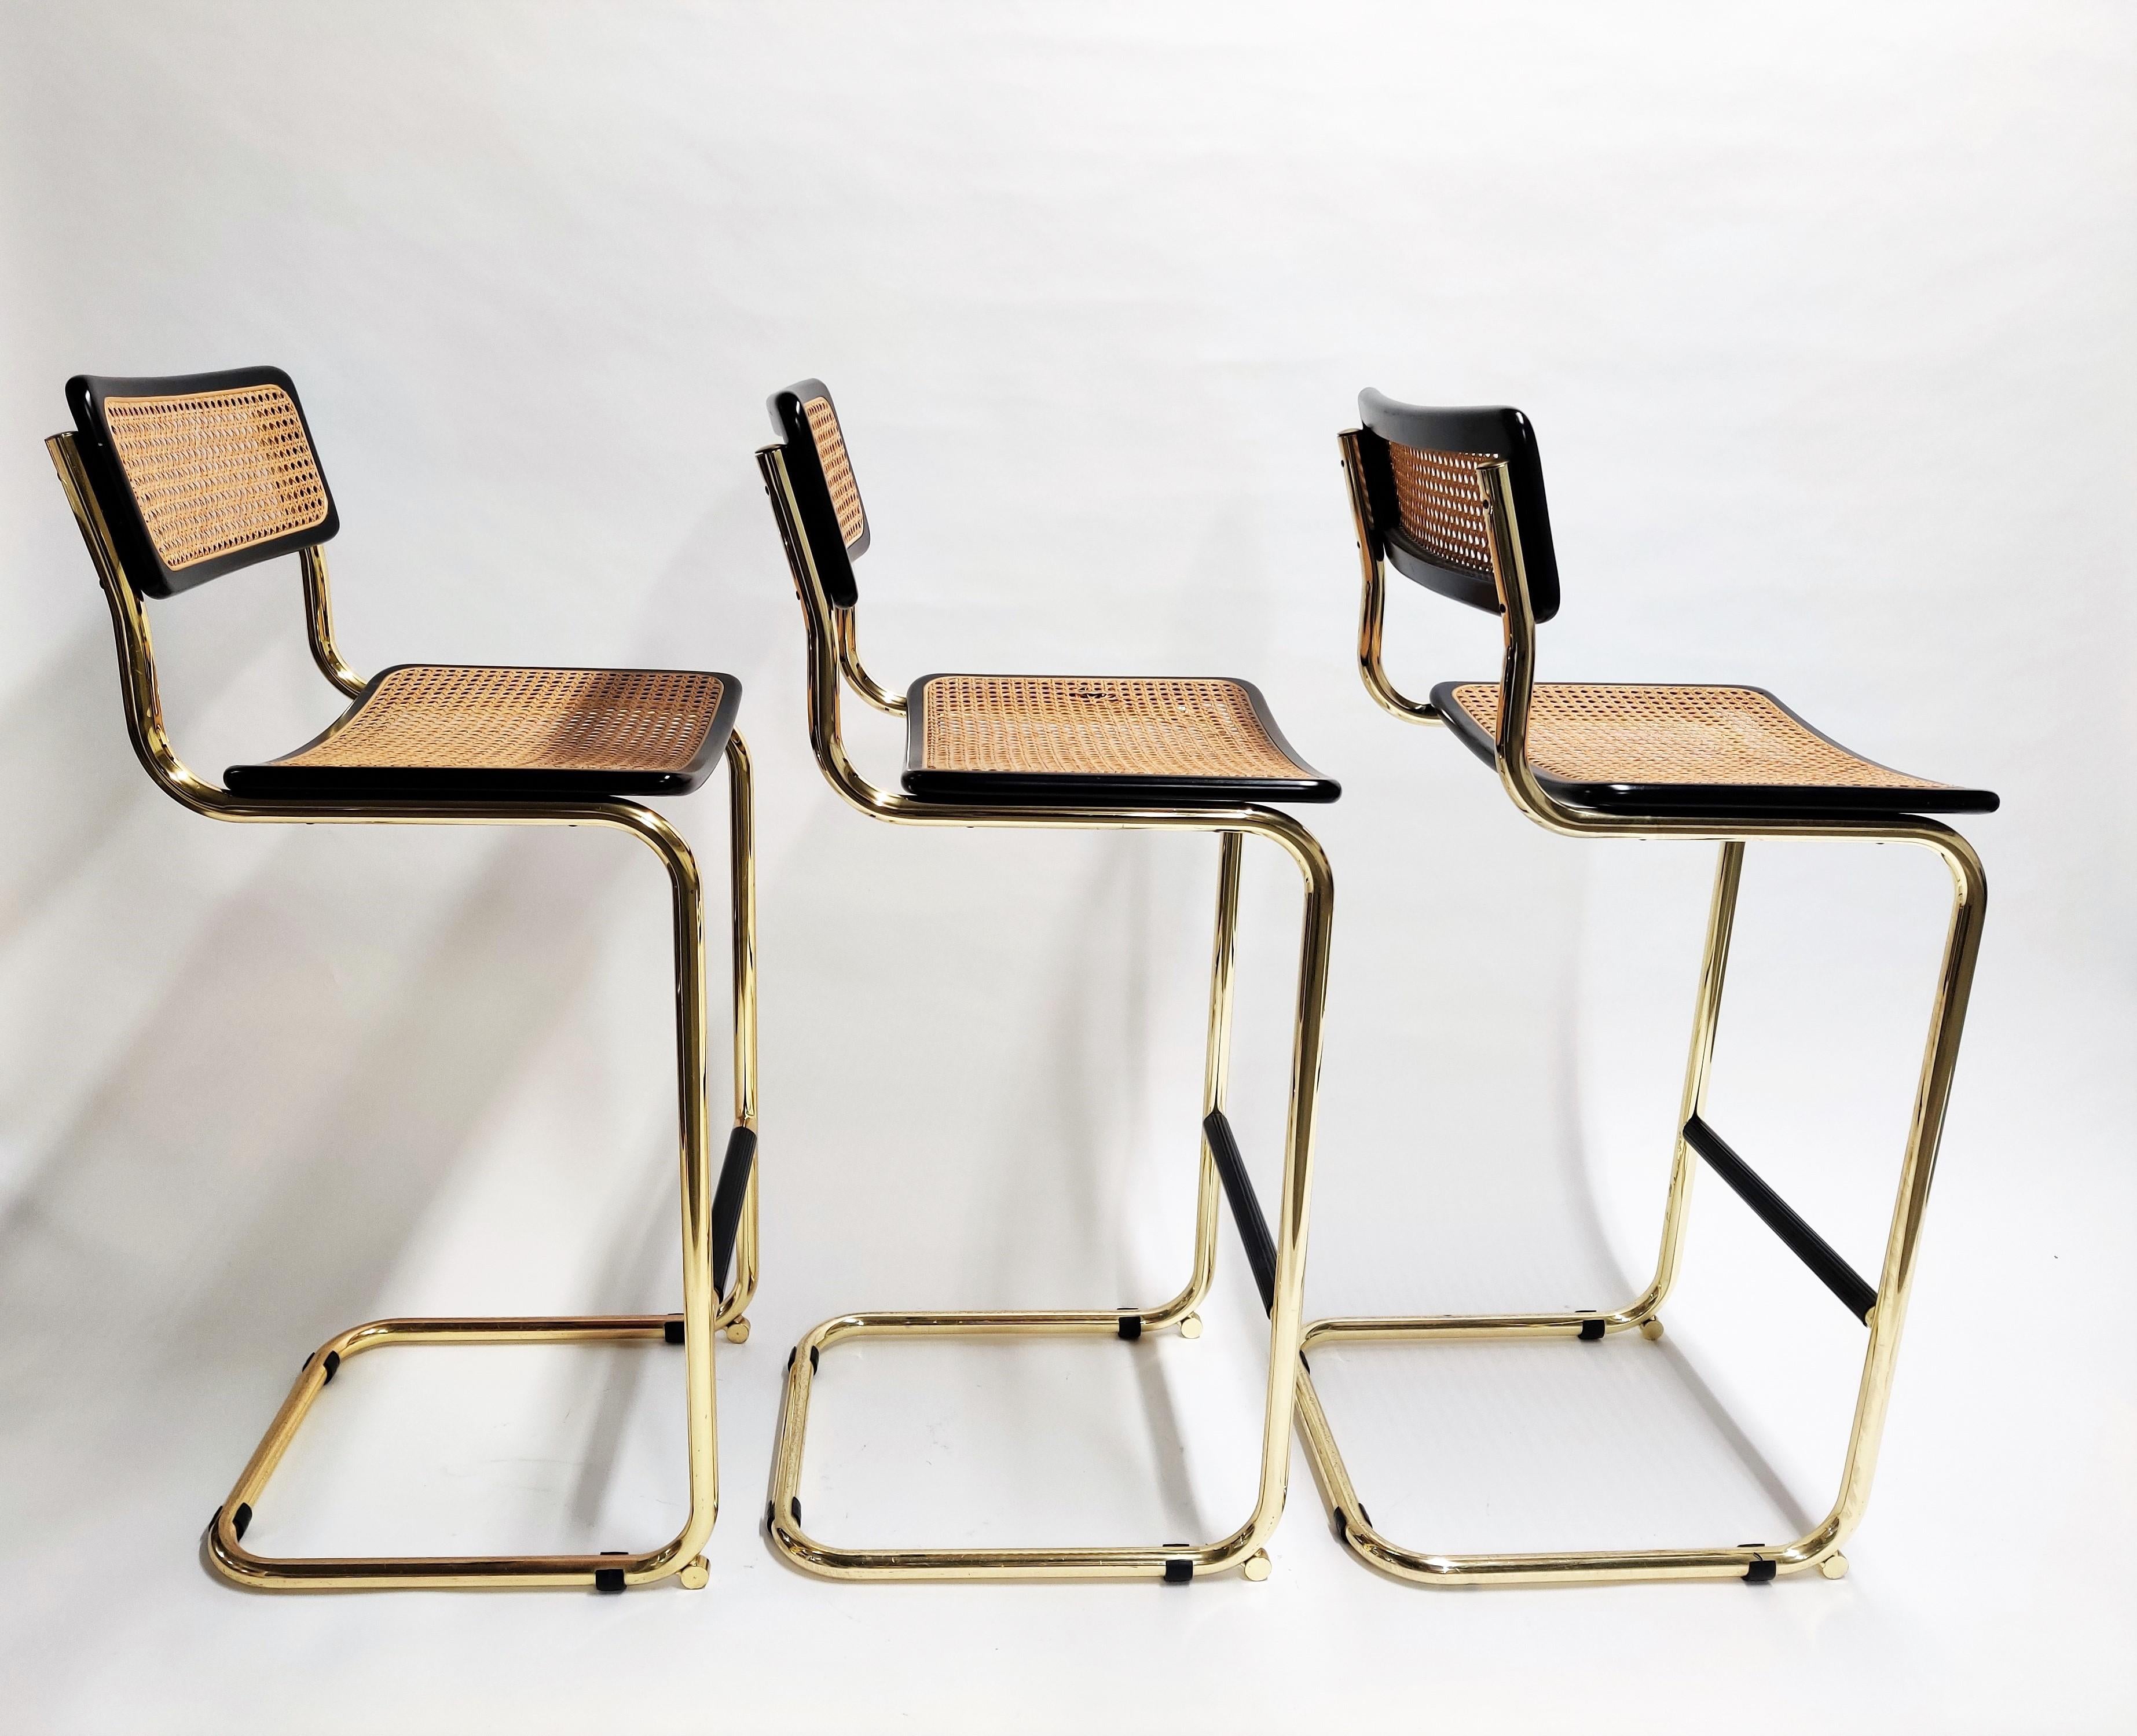 Set of 3 Marcel Breuer Bauhaus design bar stools with rare brass frames.

Tubular brass frame with cane seats and black lacquered wood, labeled 'made in italy'

All in very good condition.

Protected foot rests.

Dimensions:
Height